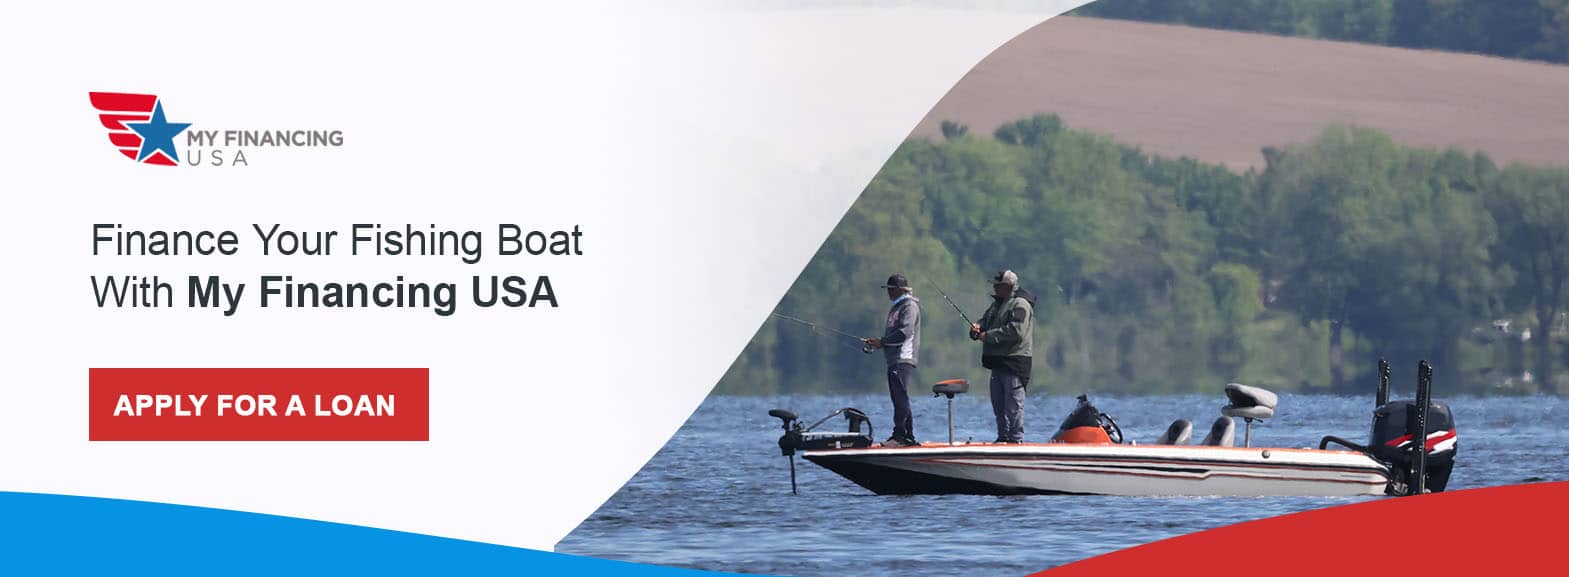 Finance Your Fishing Boat With My Financing USA. Apply for a loan!